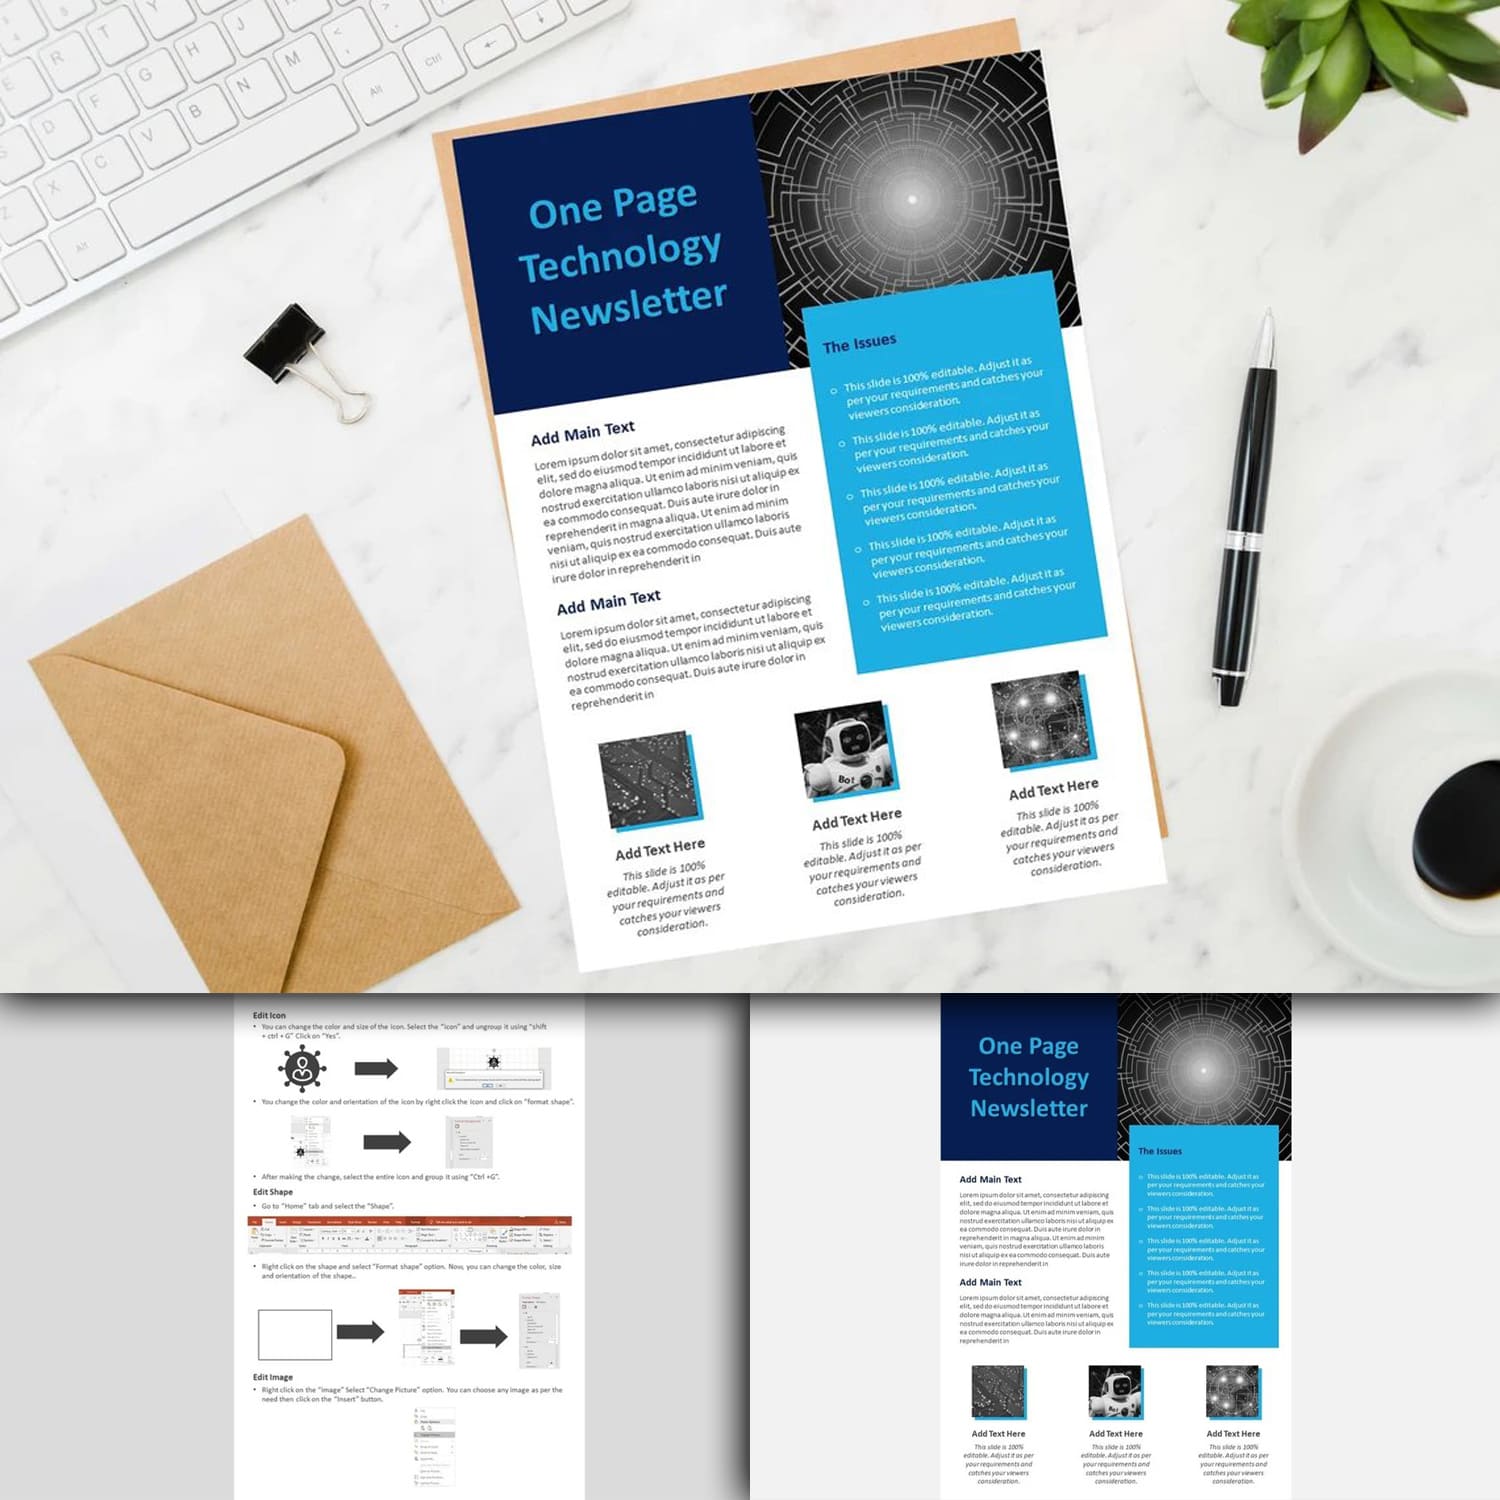 An image pack of an adorable newsletter presentation slide template.